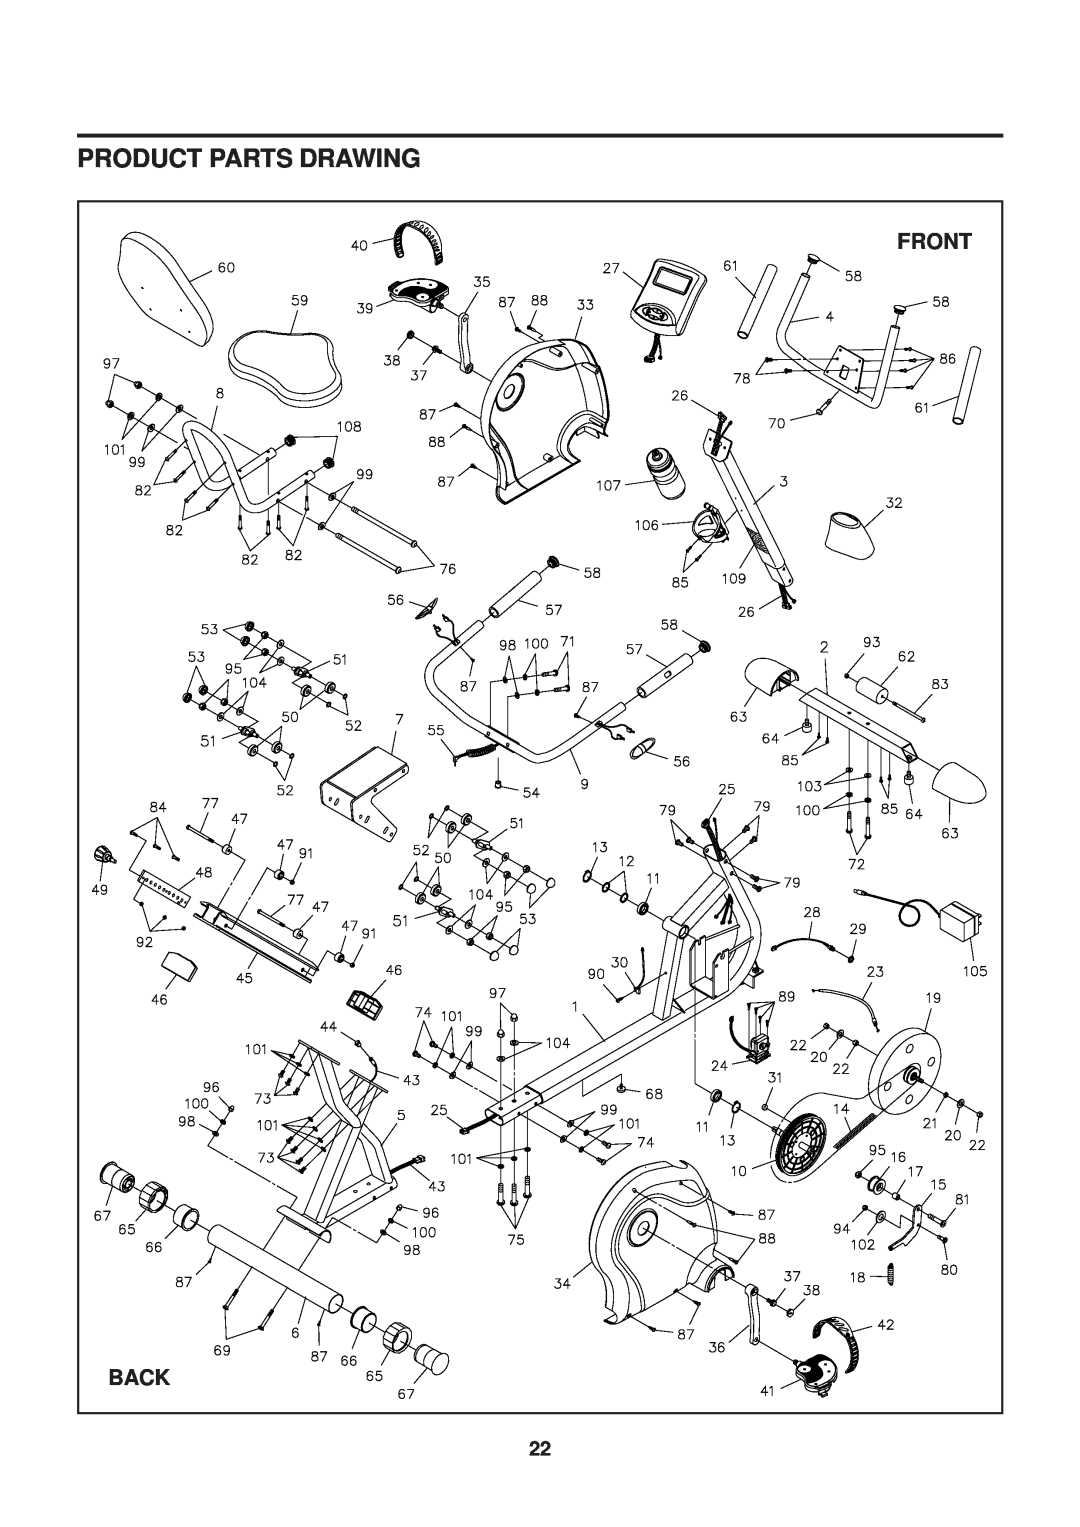 Stamina Products 15-7200 owner manual Product Parts Drawing, Front 